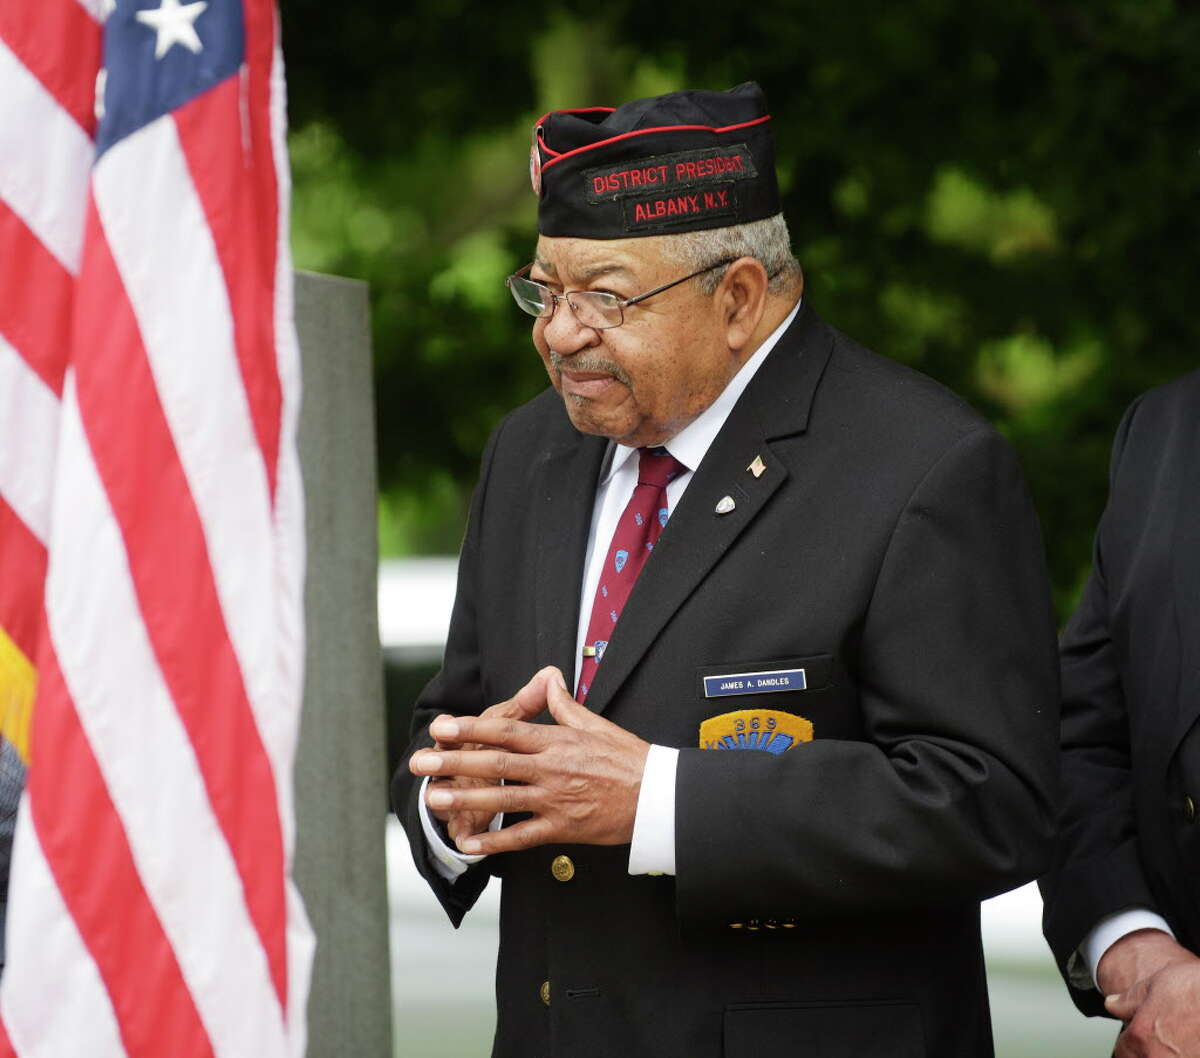 James Dandles, the district president of the 369th Veterans Association (Henry Johnson?•s Regiment) was awarded the first Henry Johnson Award for Distinguished Community Service at an event to mark the first annual Henry Johnson Day on Monday, June 5, 2017, in Albany, N.Y. A replica Medal of Honor has also been added to the Henry Johnson Statue, which was unveiled on Monday. (Paul Buckowski / Times Union)